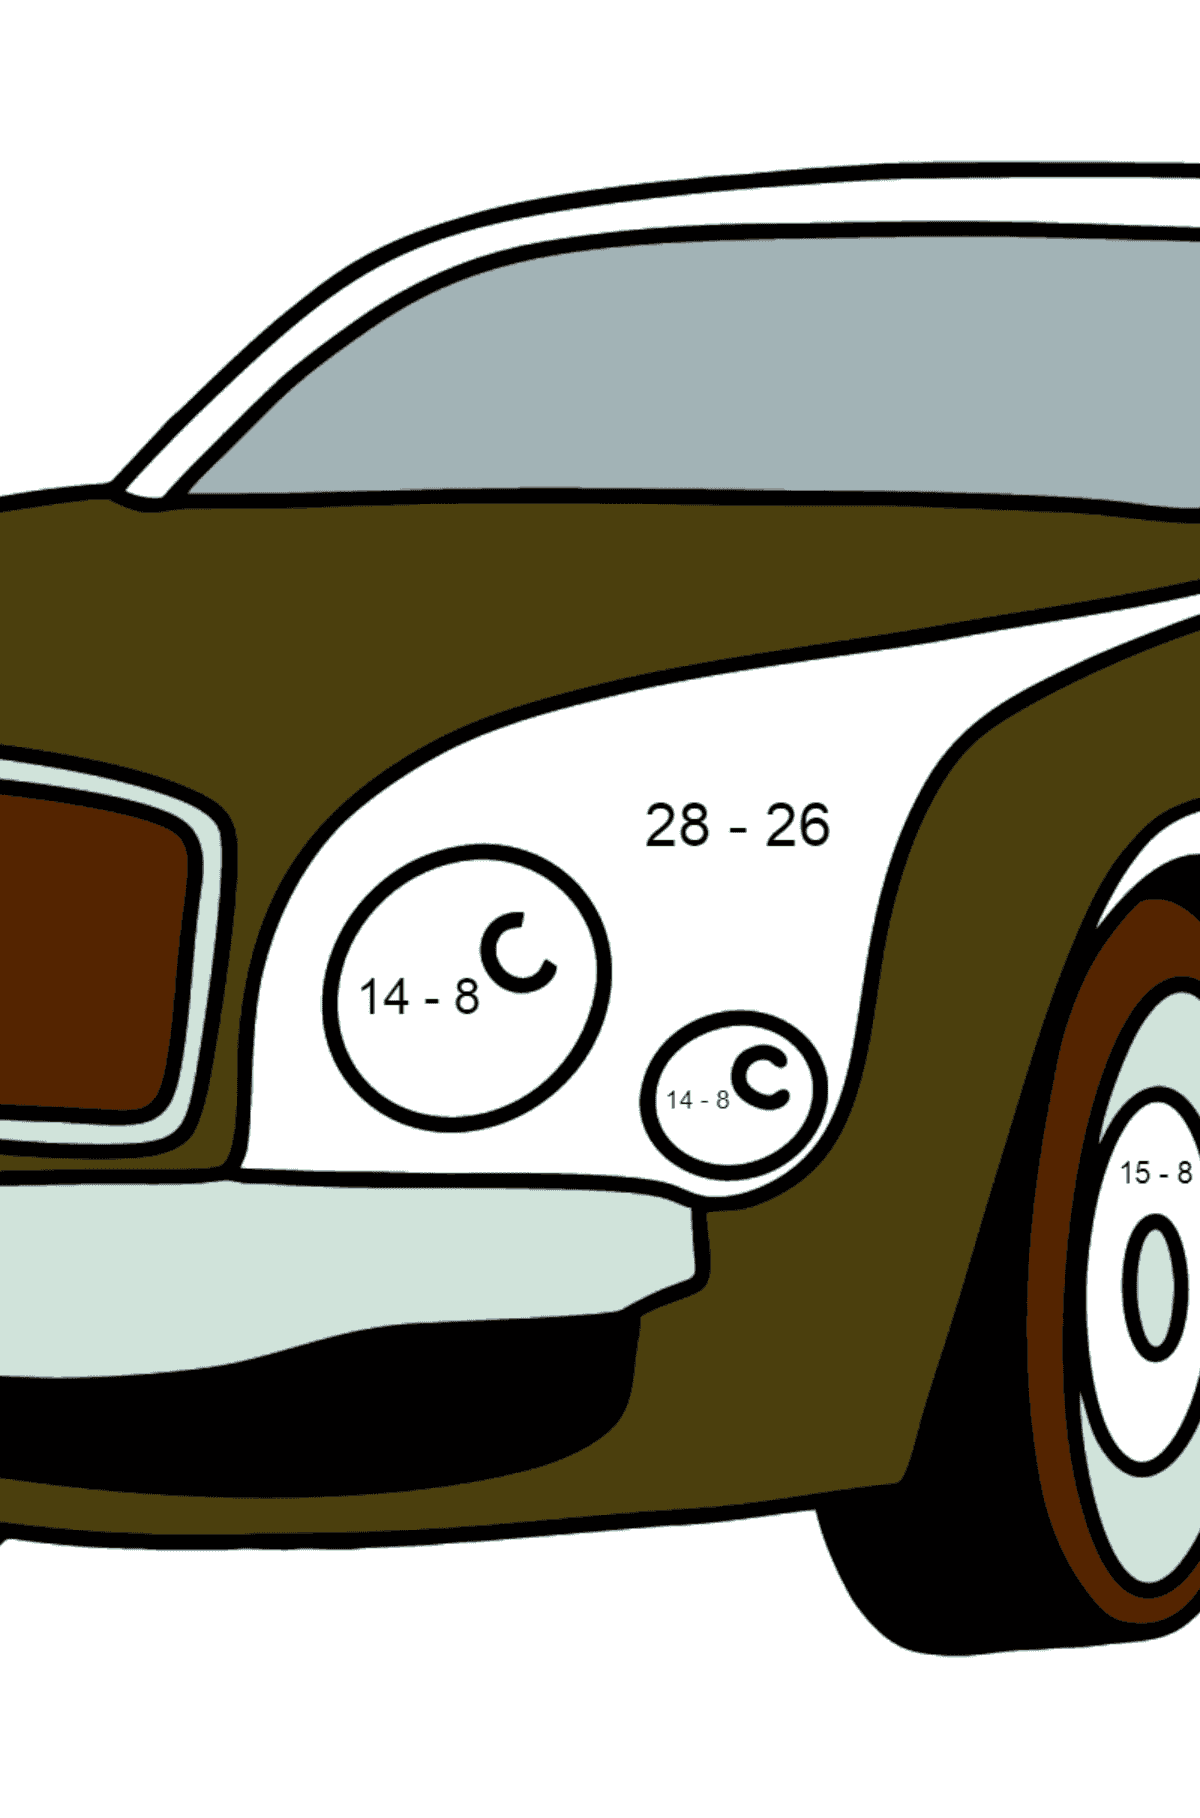 Bentley Car Coloring Page - Math Coloring - Subtraction for Kids